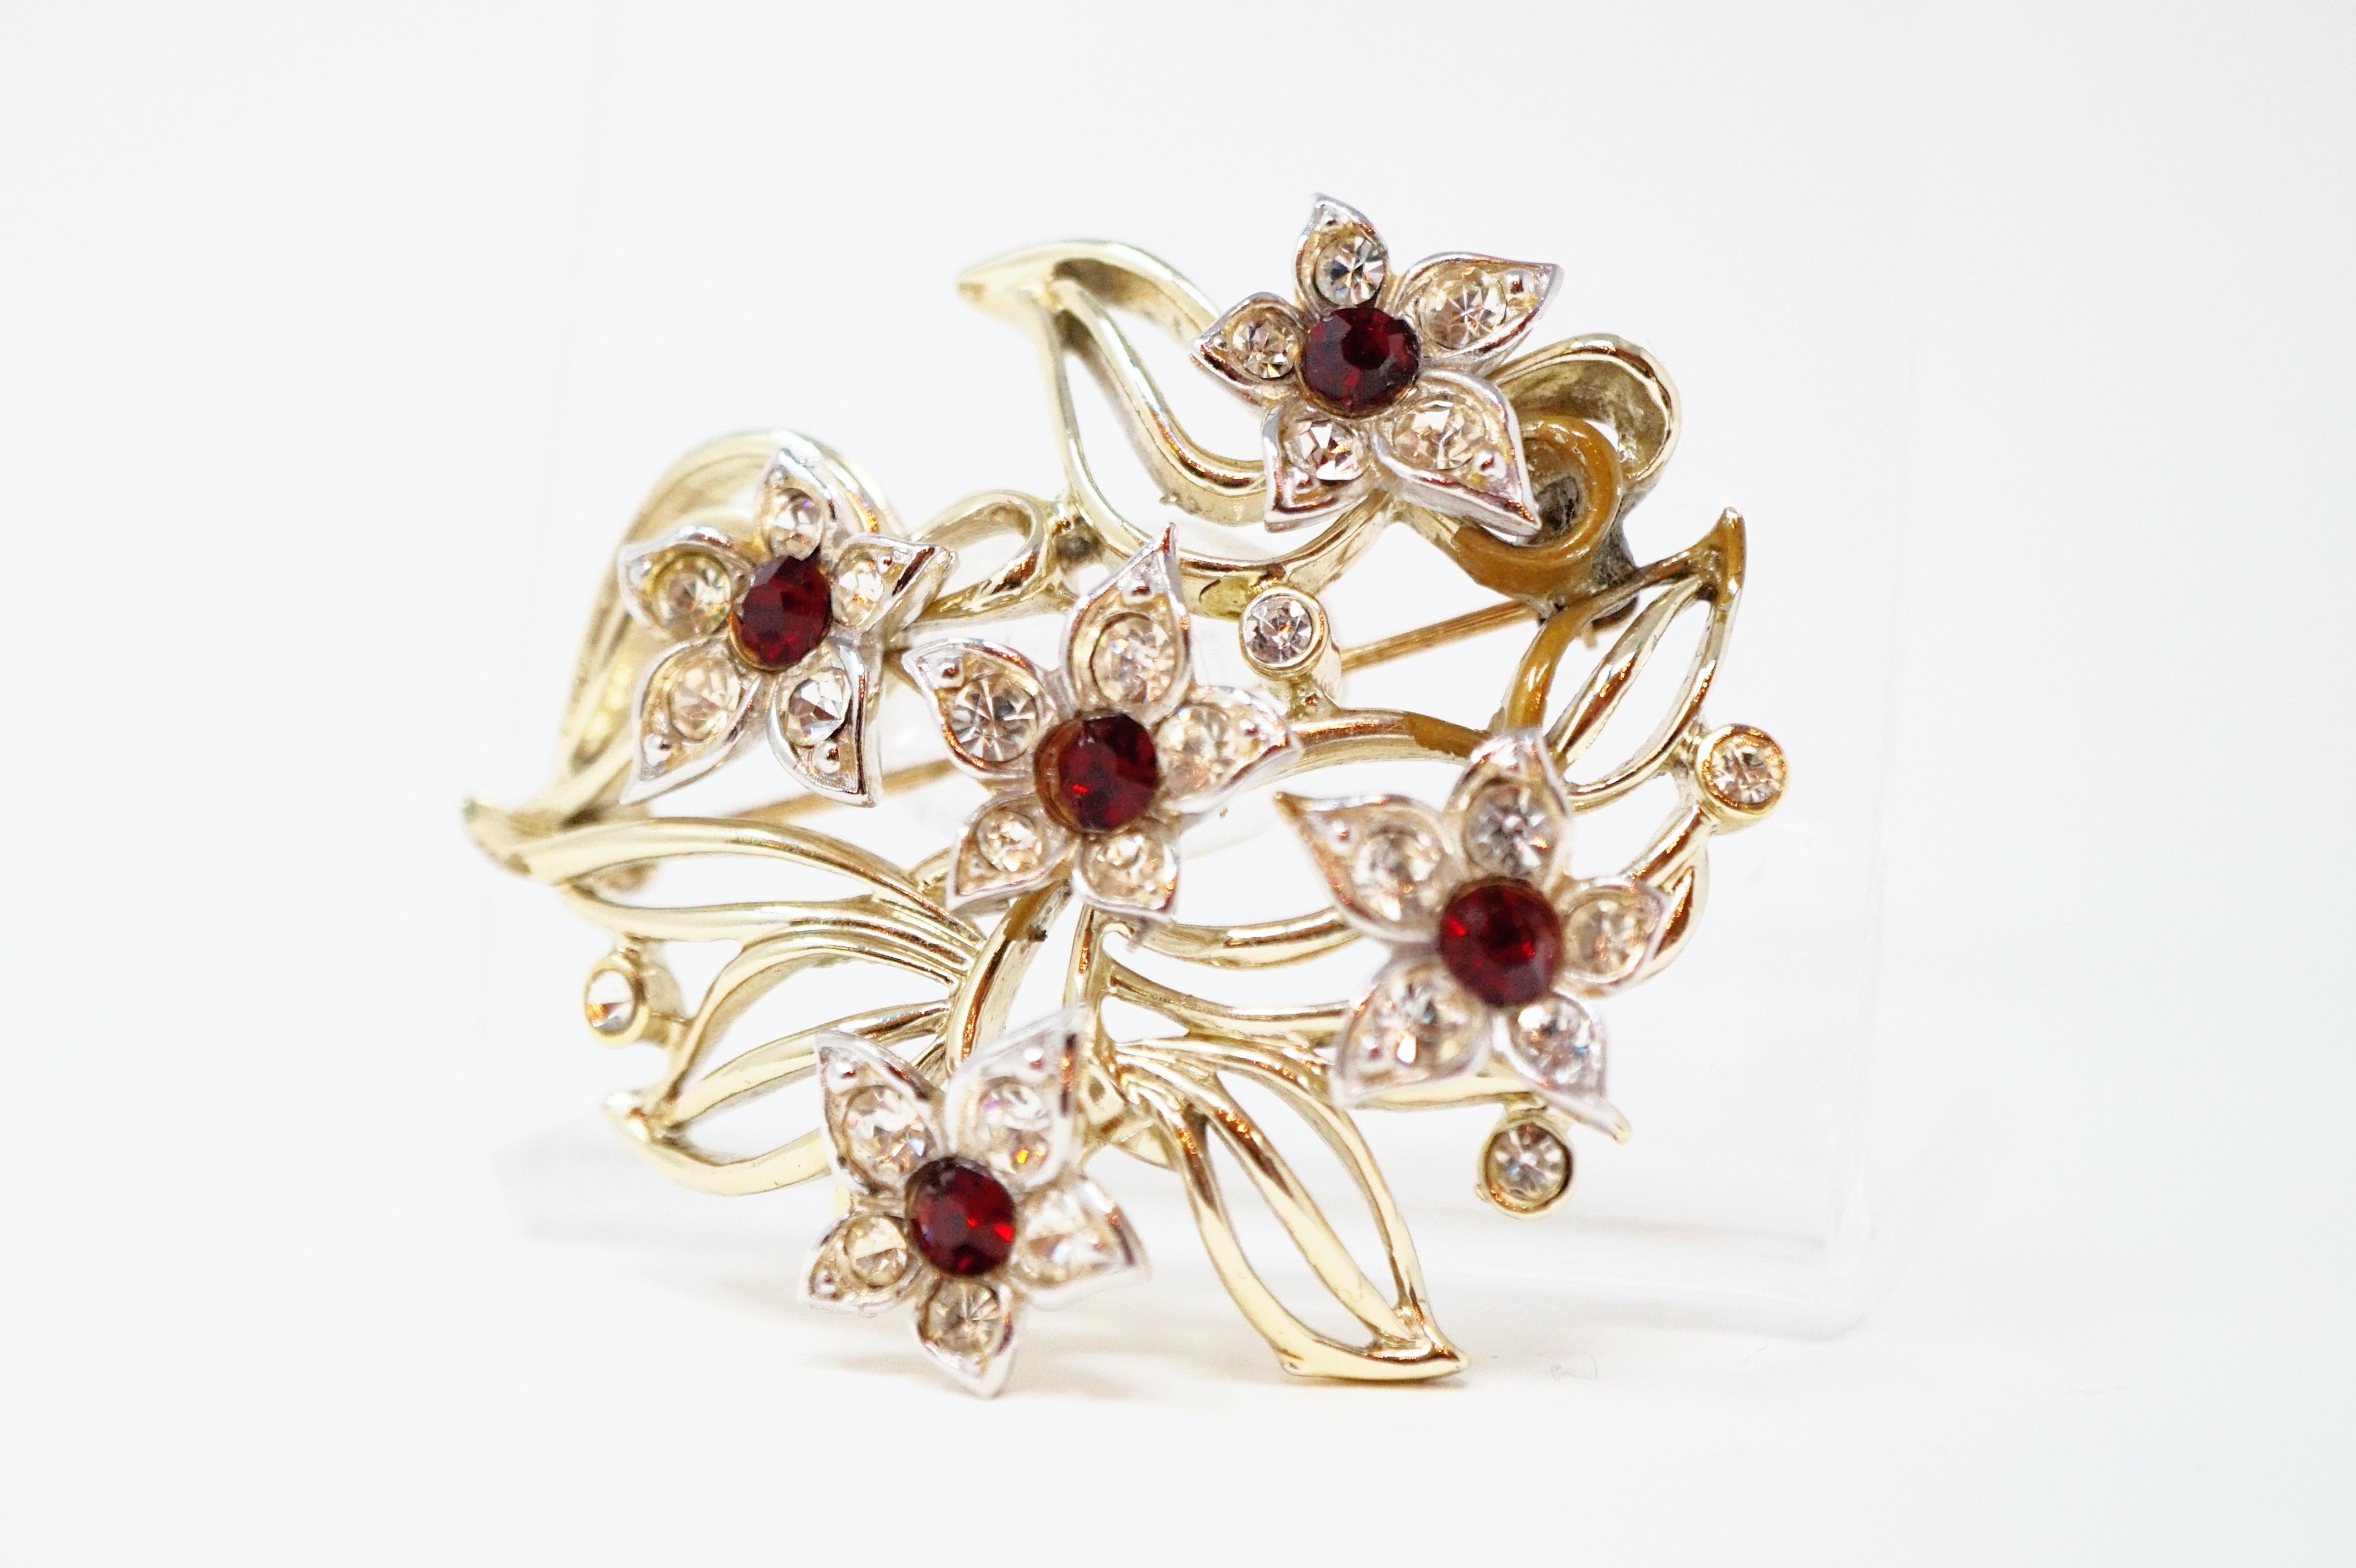 Vintage Kramer Floral Brooch with Ruby Rhinestones, Signed, circa 1940s In Good Condition For Sale In McKinney, TX